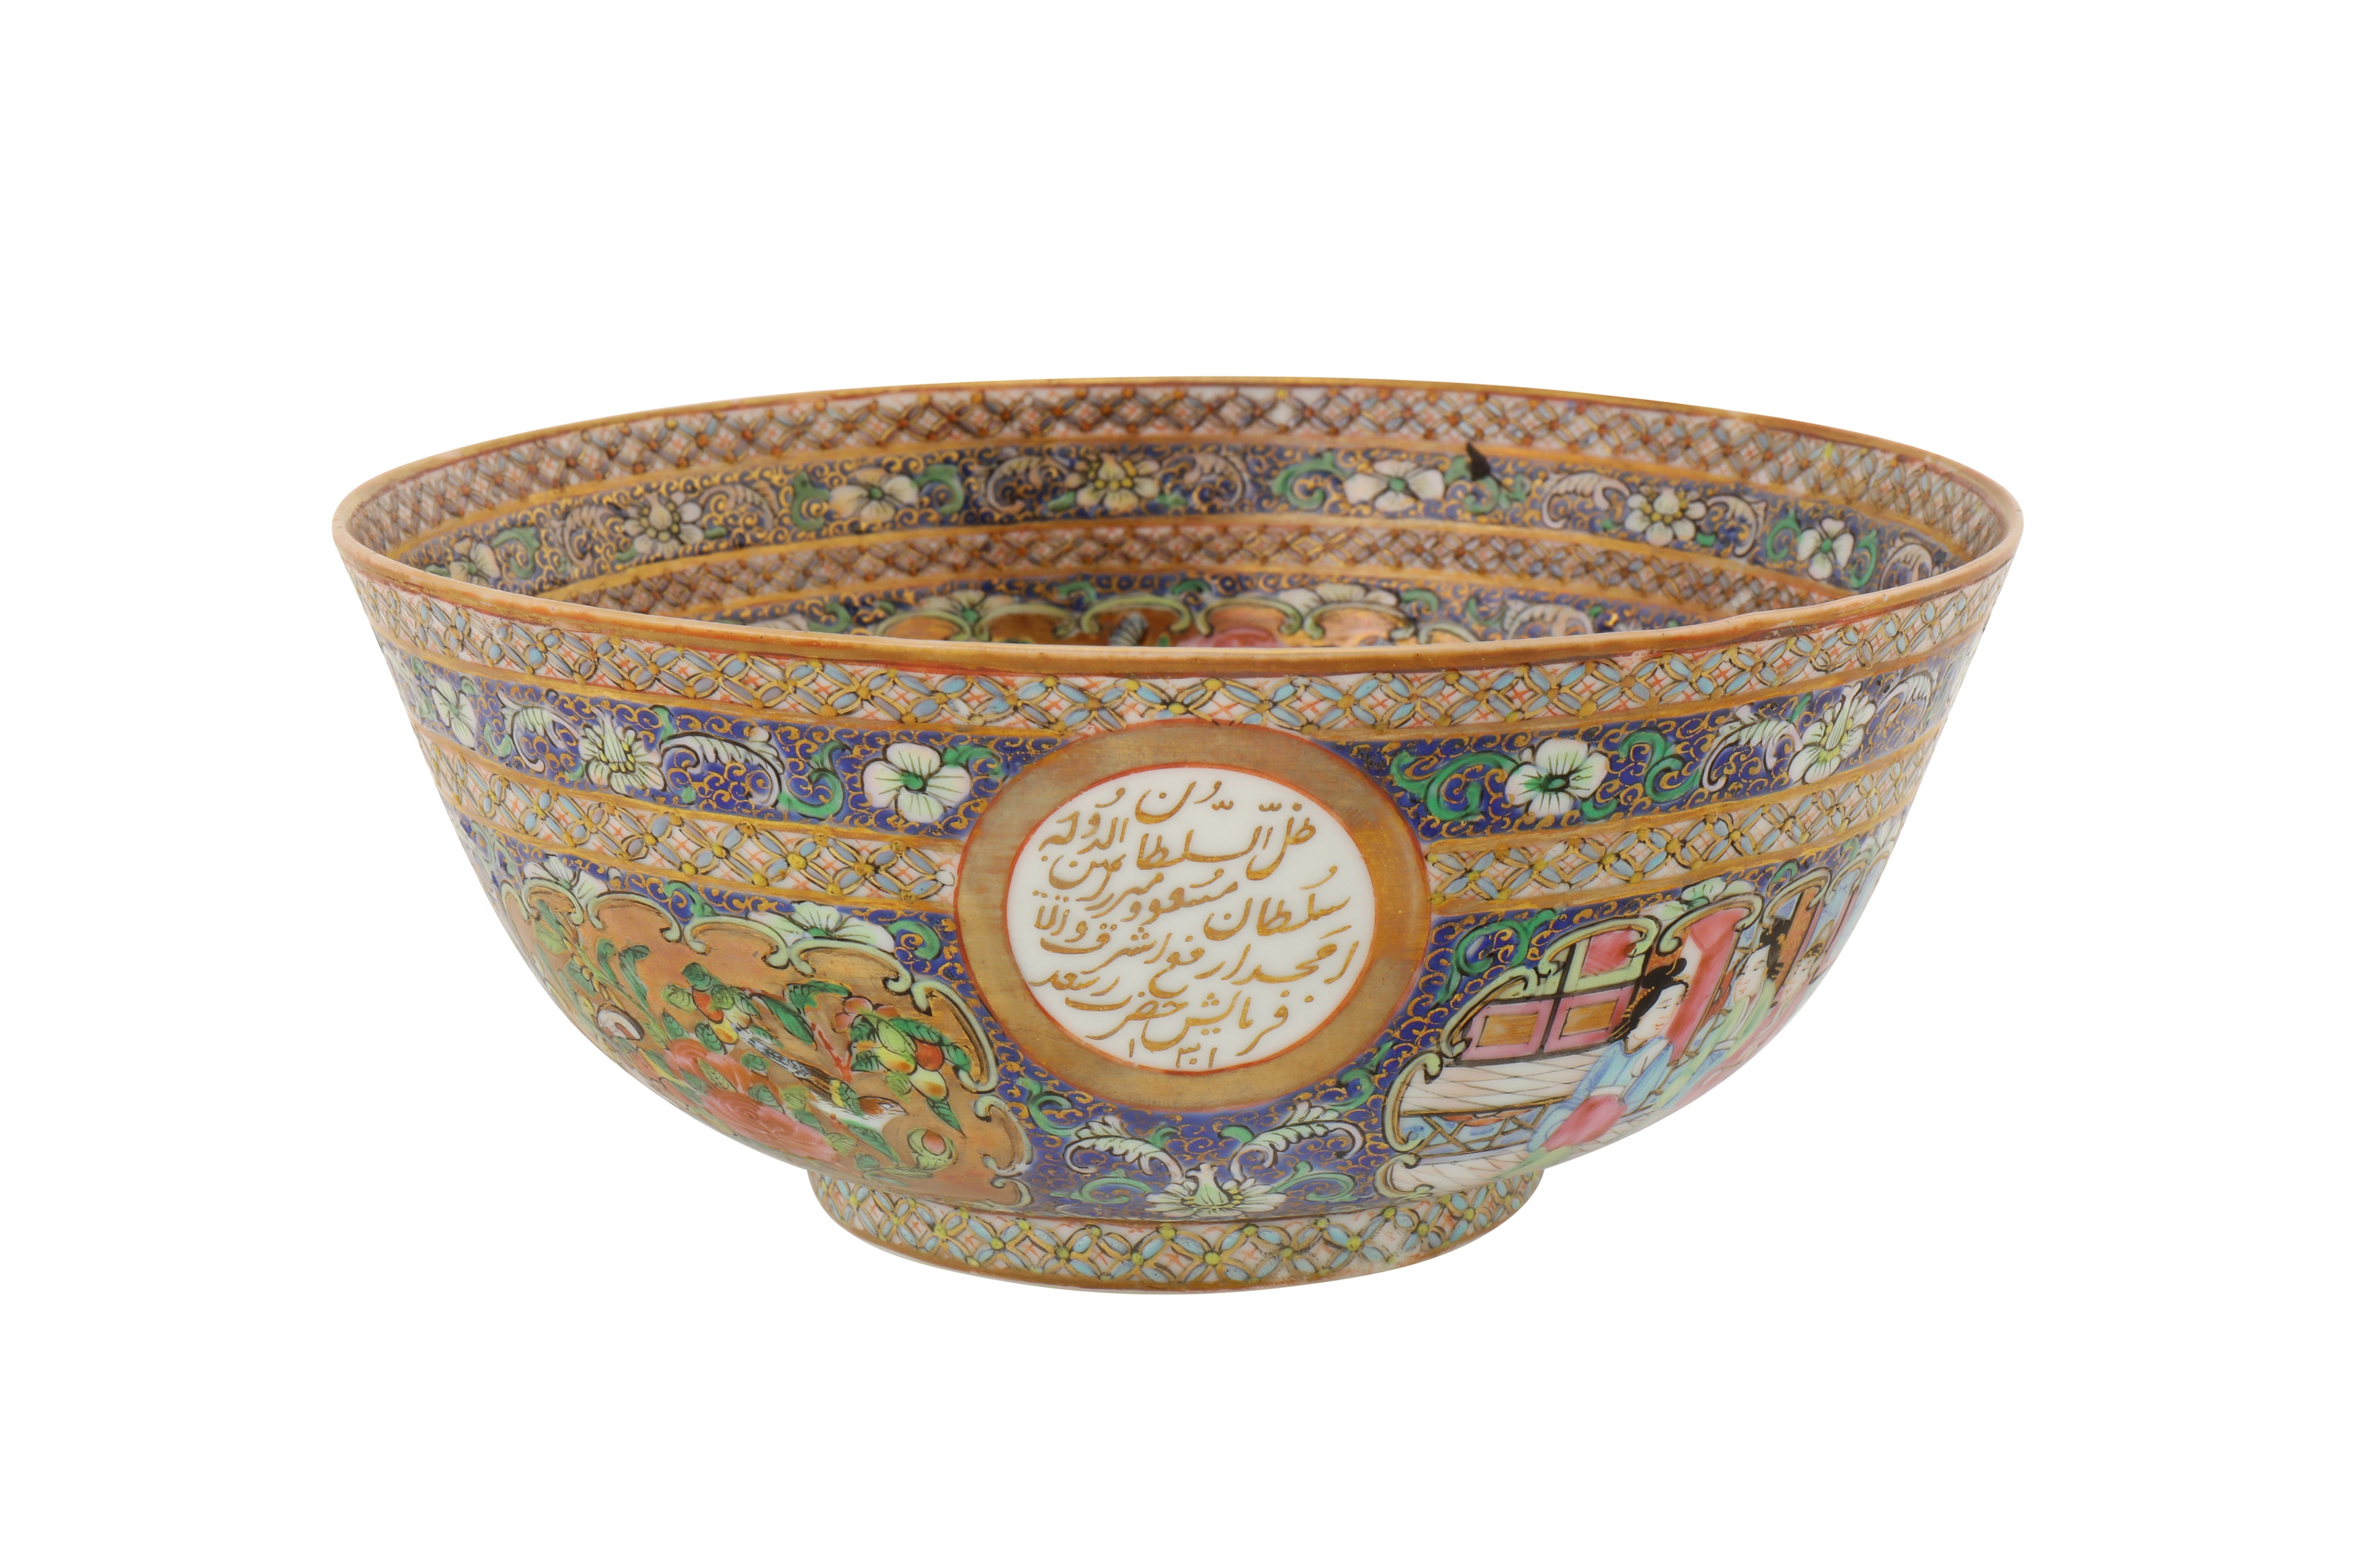 A MEDIUM-SIZED BOWL AND DISH AND SMALLER BOWL FROM THE ZILL AL-SULTAN CANTON PORCELAIN SERVICE - Image 8 of 17